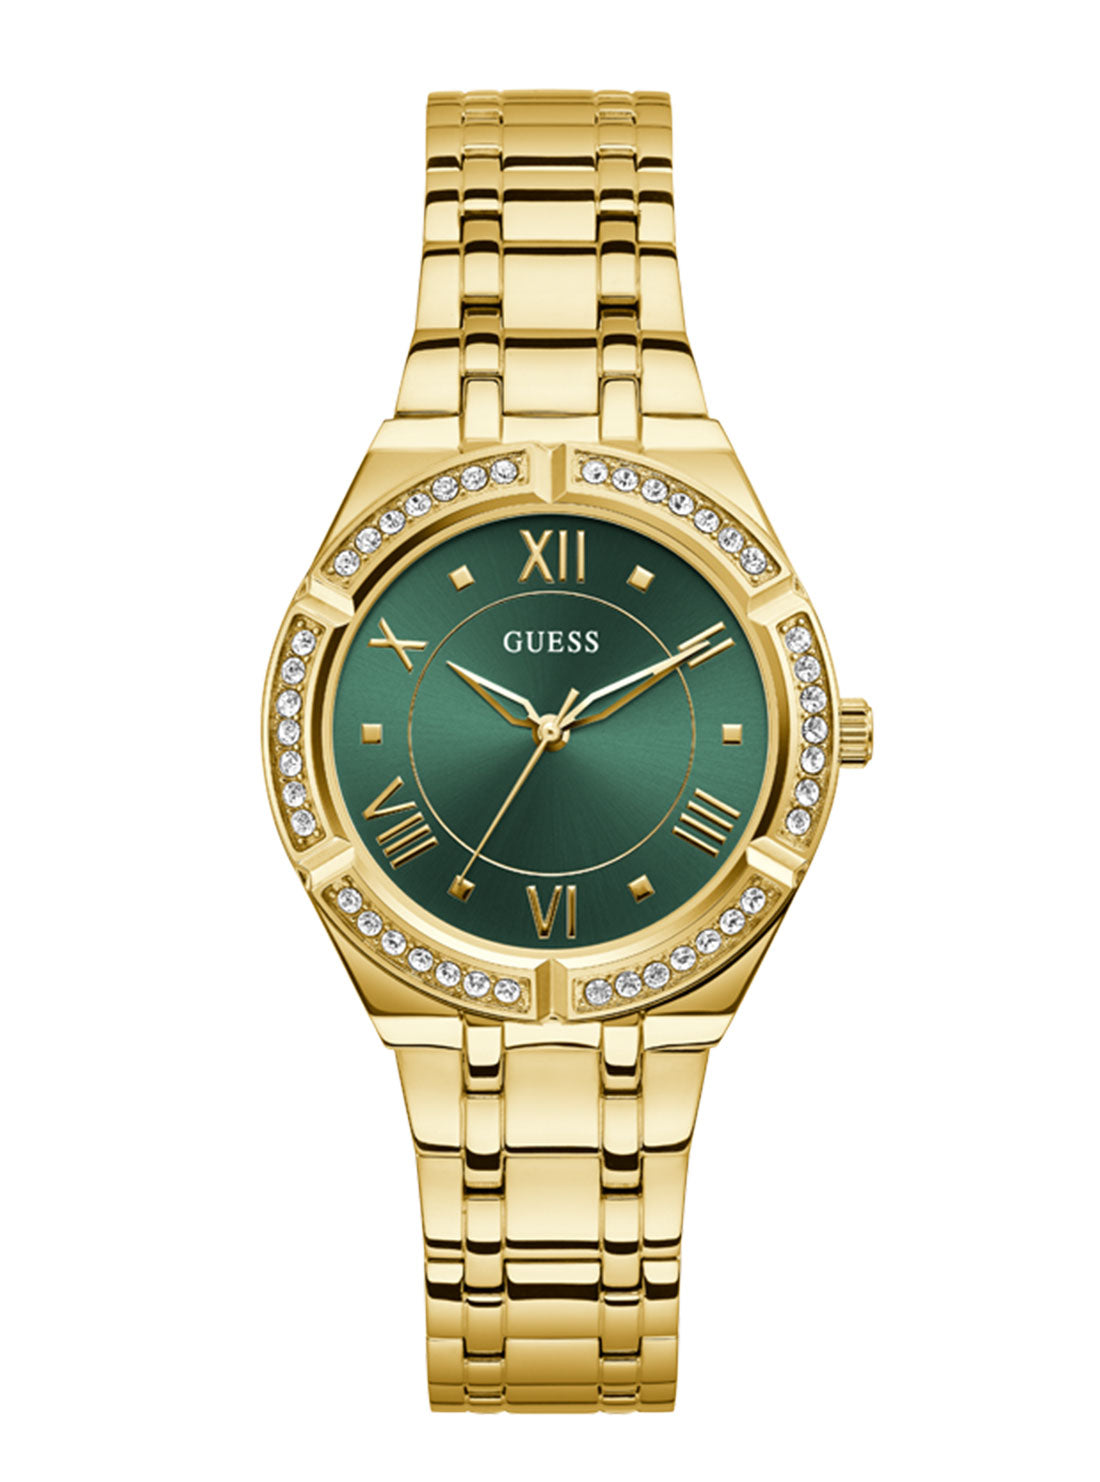 GUESS Women's Gold Cosmo Green Crystal Watch GW0033L8 Front View